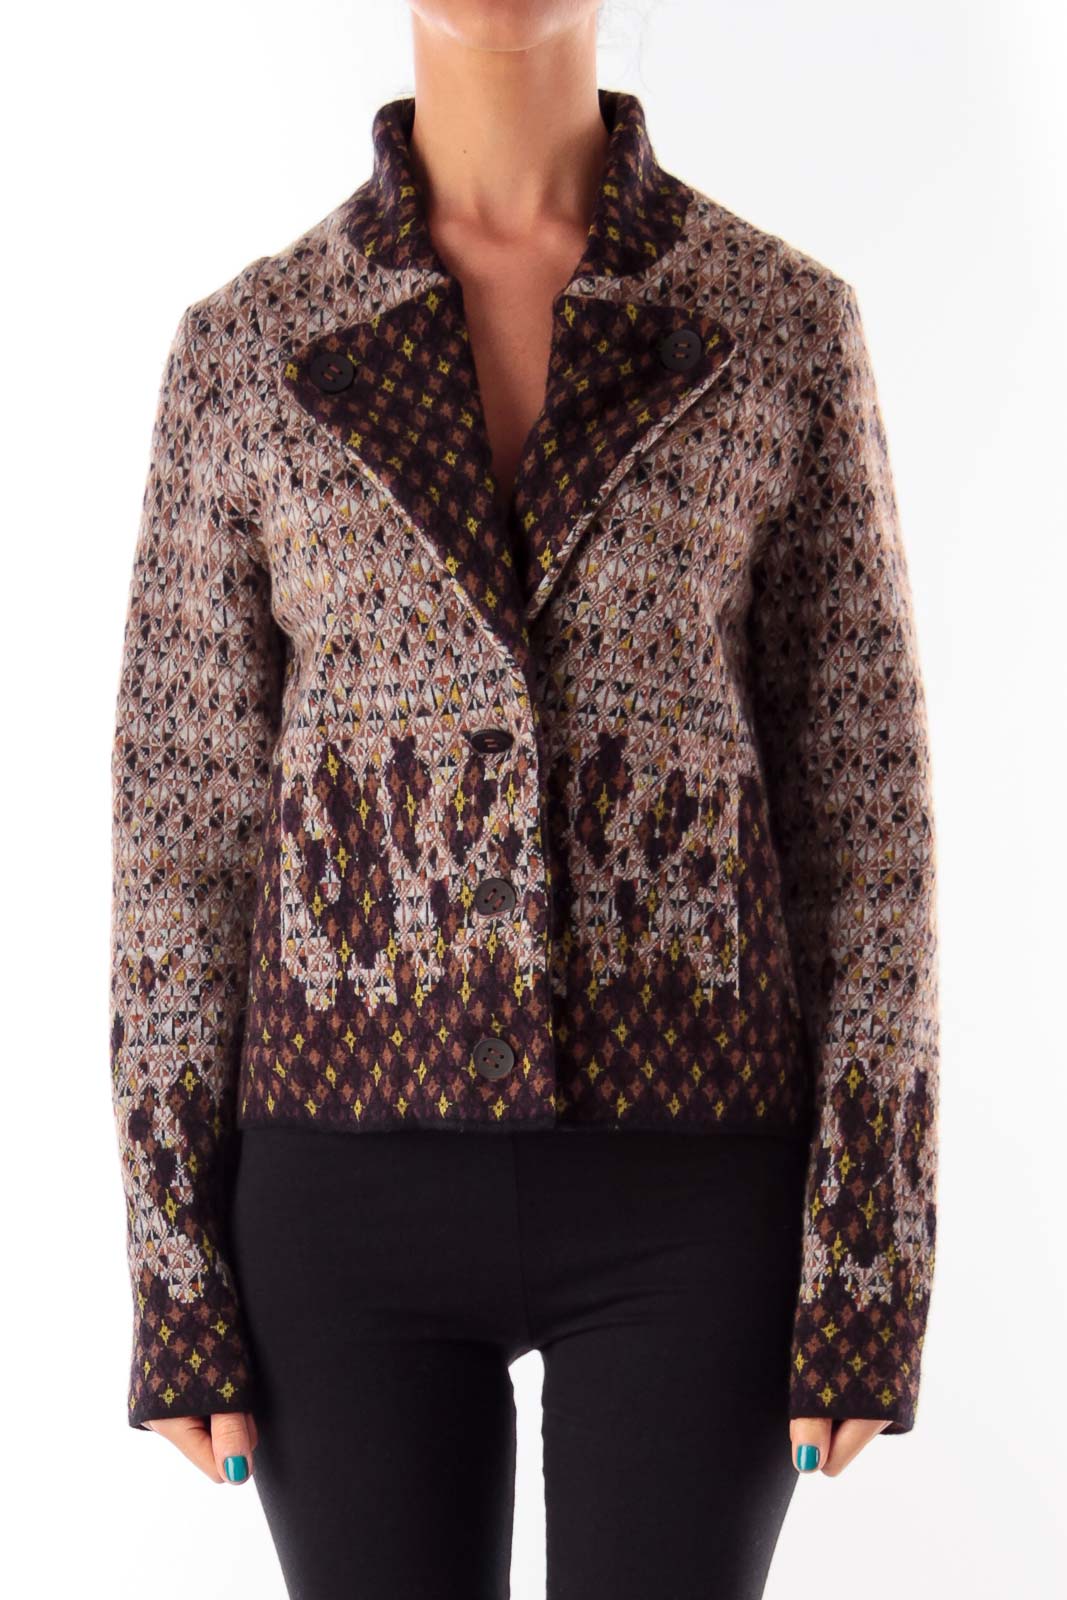 Color Print Wool Jacket Front